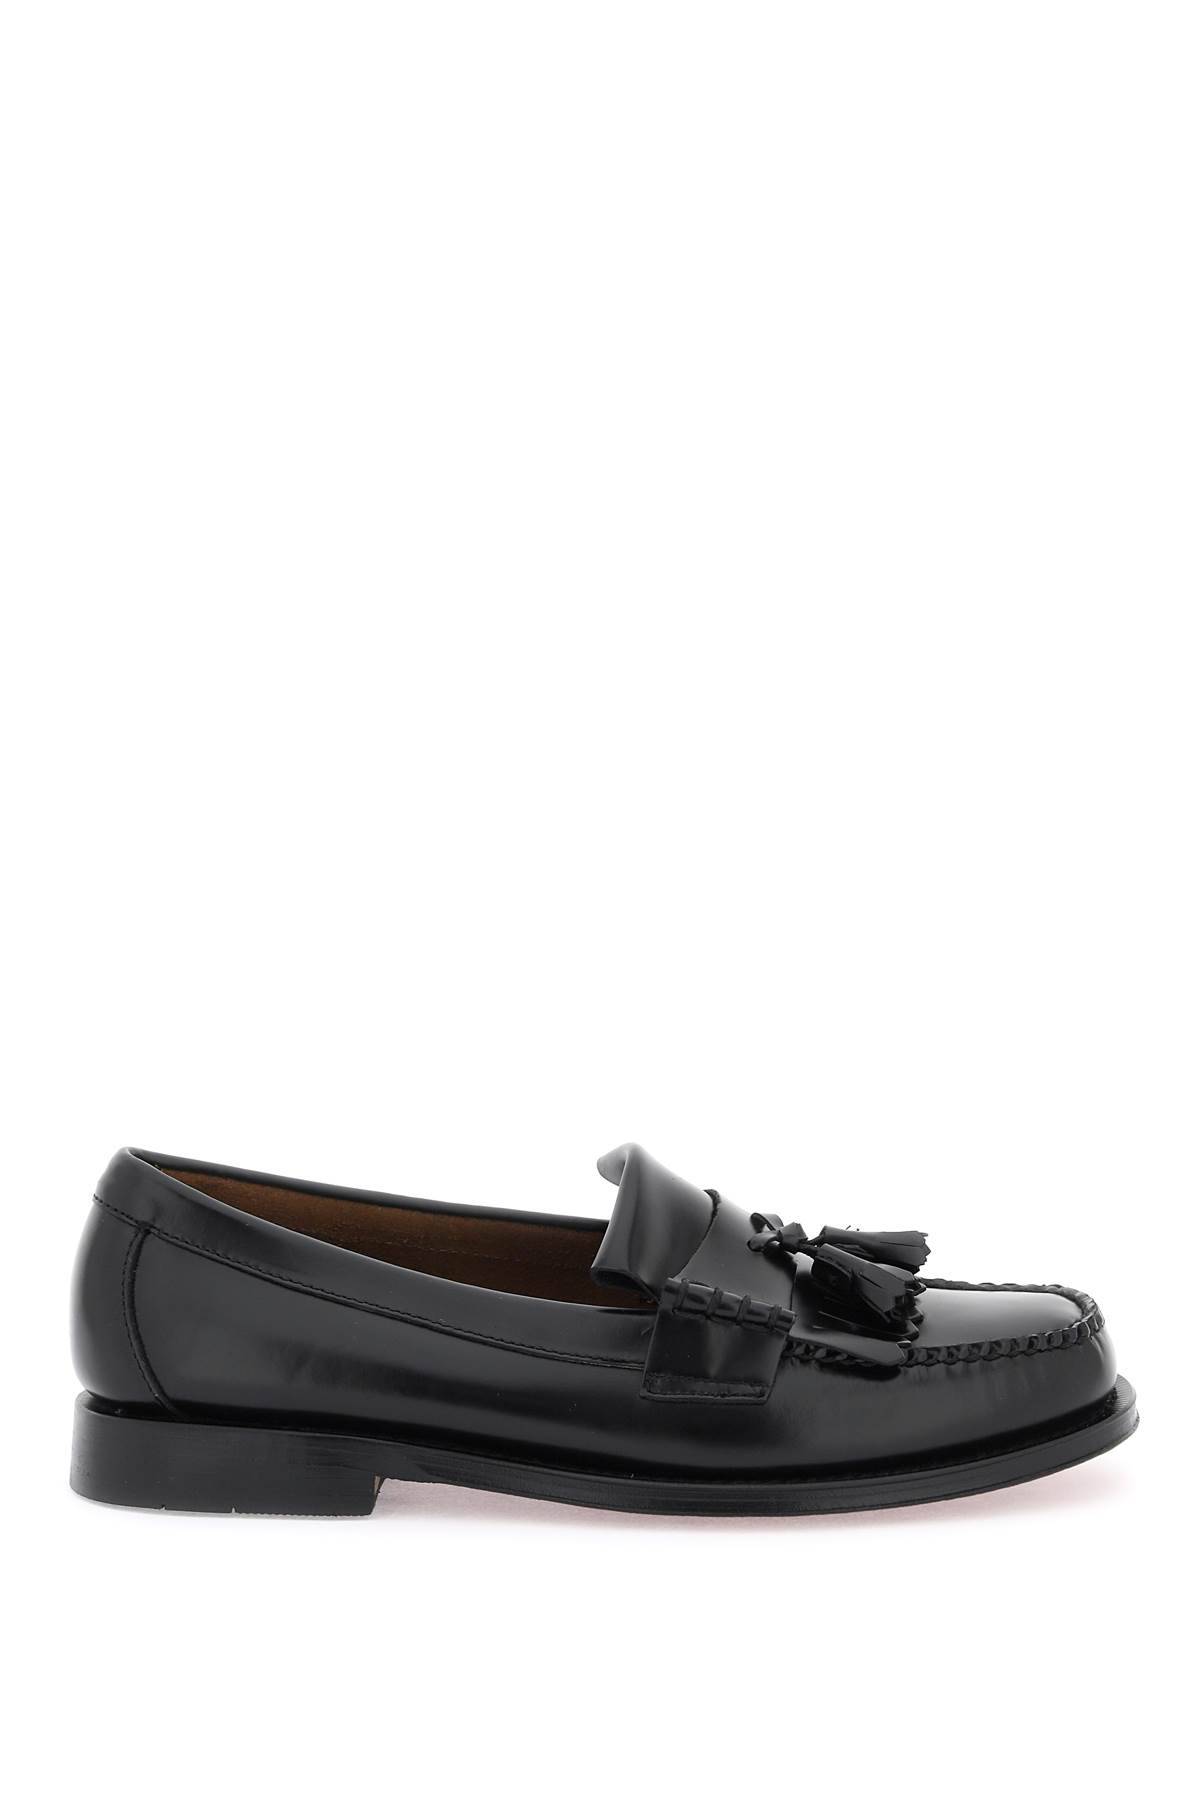 G.H. BASS G. H. BASS esther kiltie weejuns loafers in brushed leather